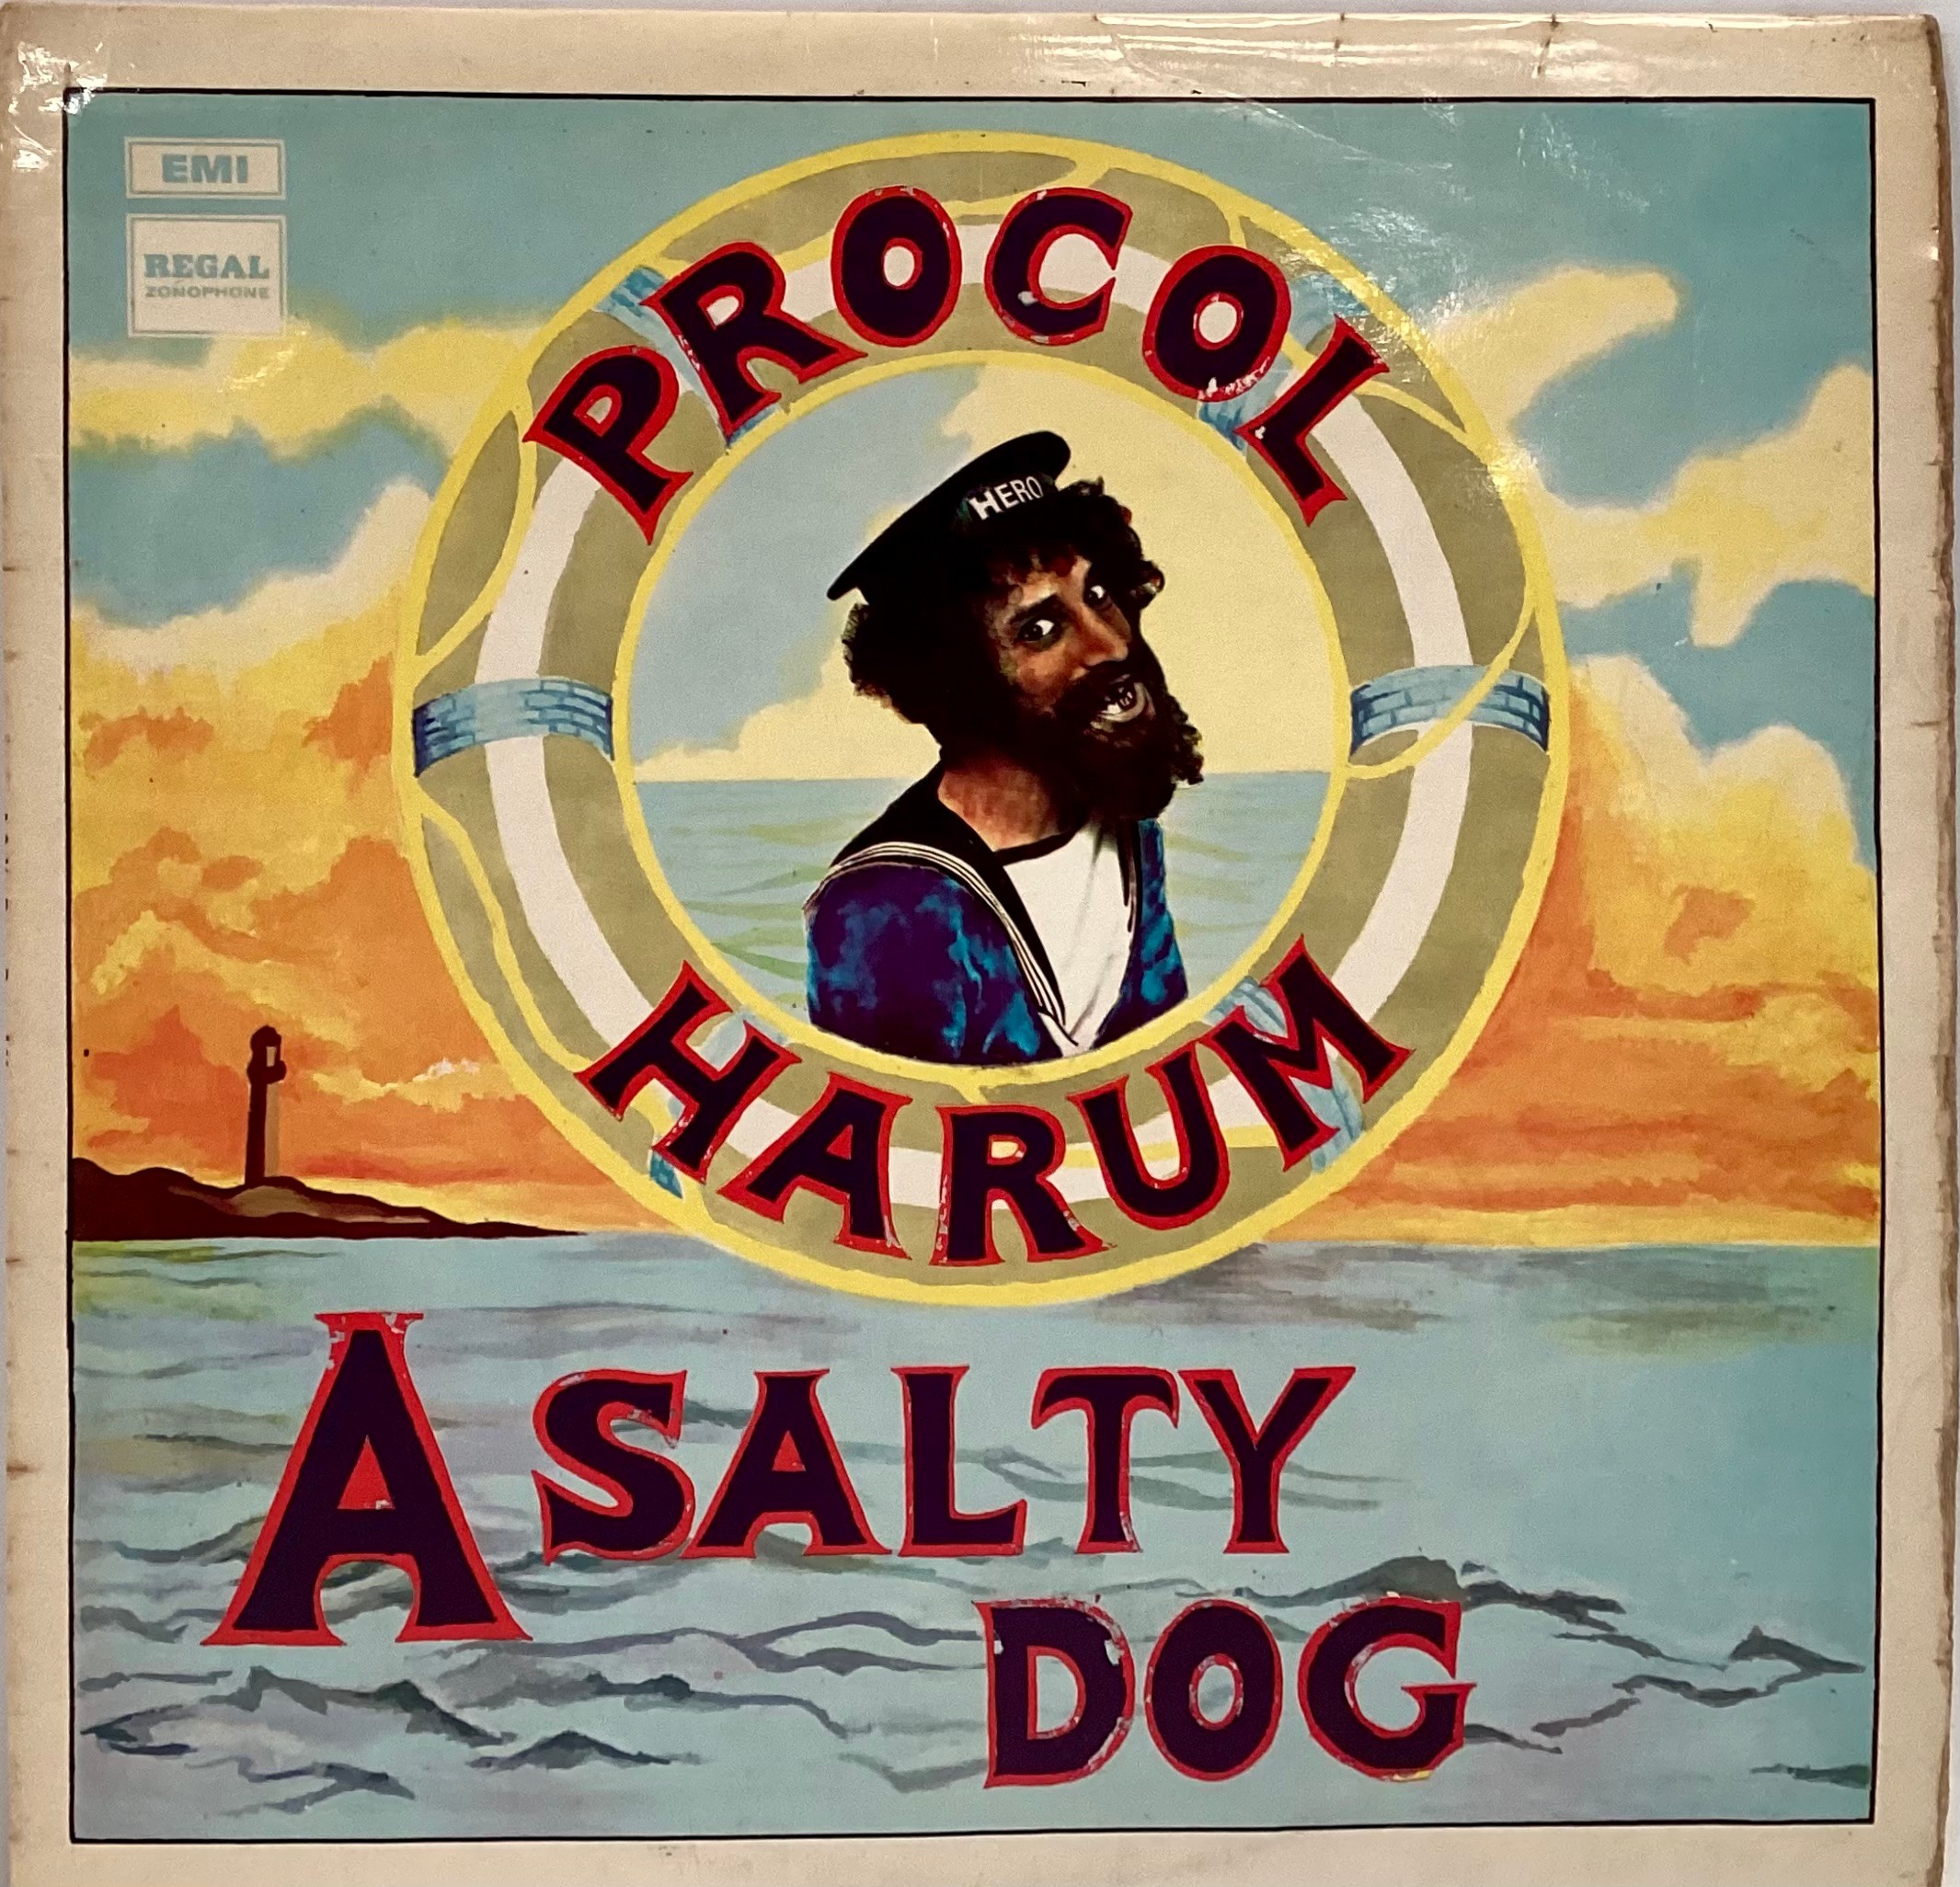 VINYL LP BY PROCOL HARUM "A SALTY DOG". This is an original 1969 press on the Regal Zonophone